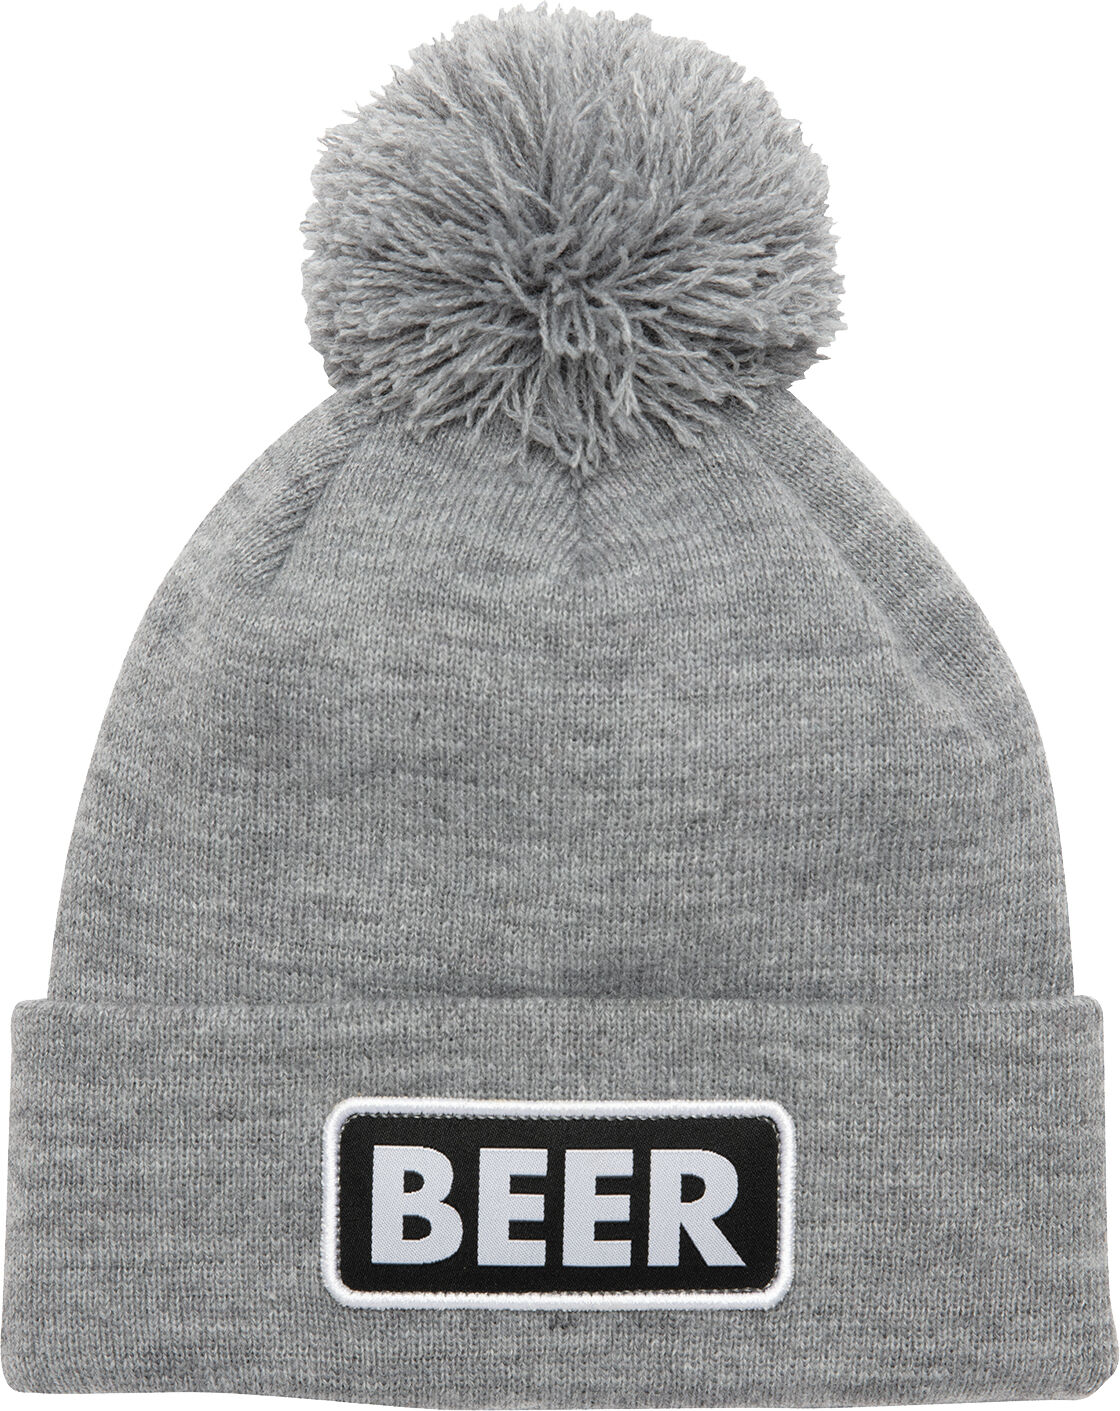 COAL THE VICE HEATHER GREY BEER One Size